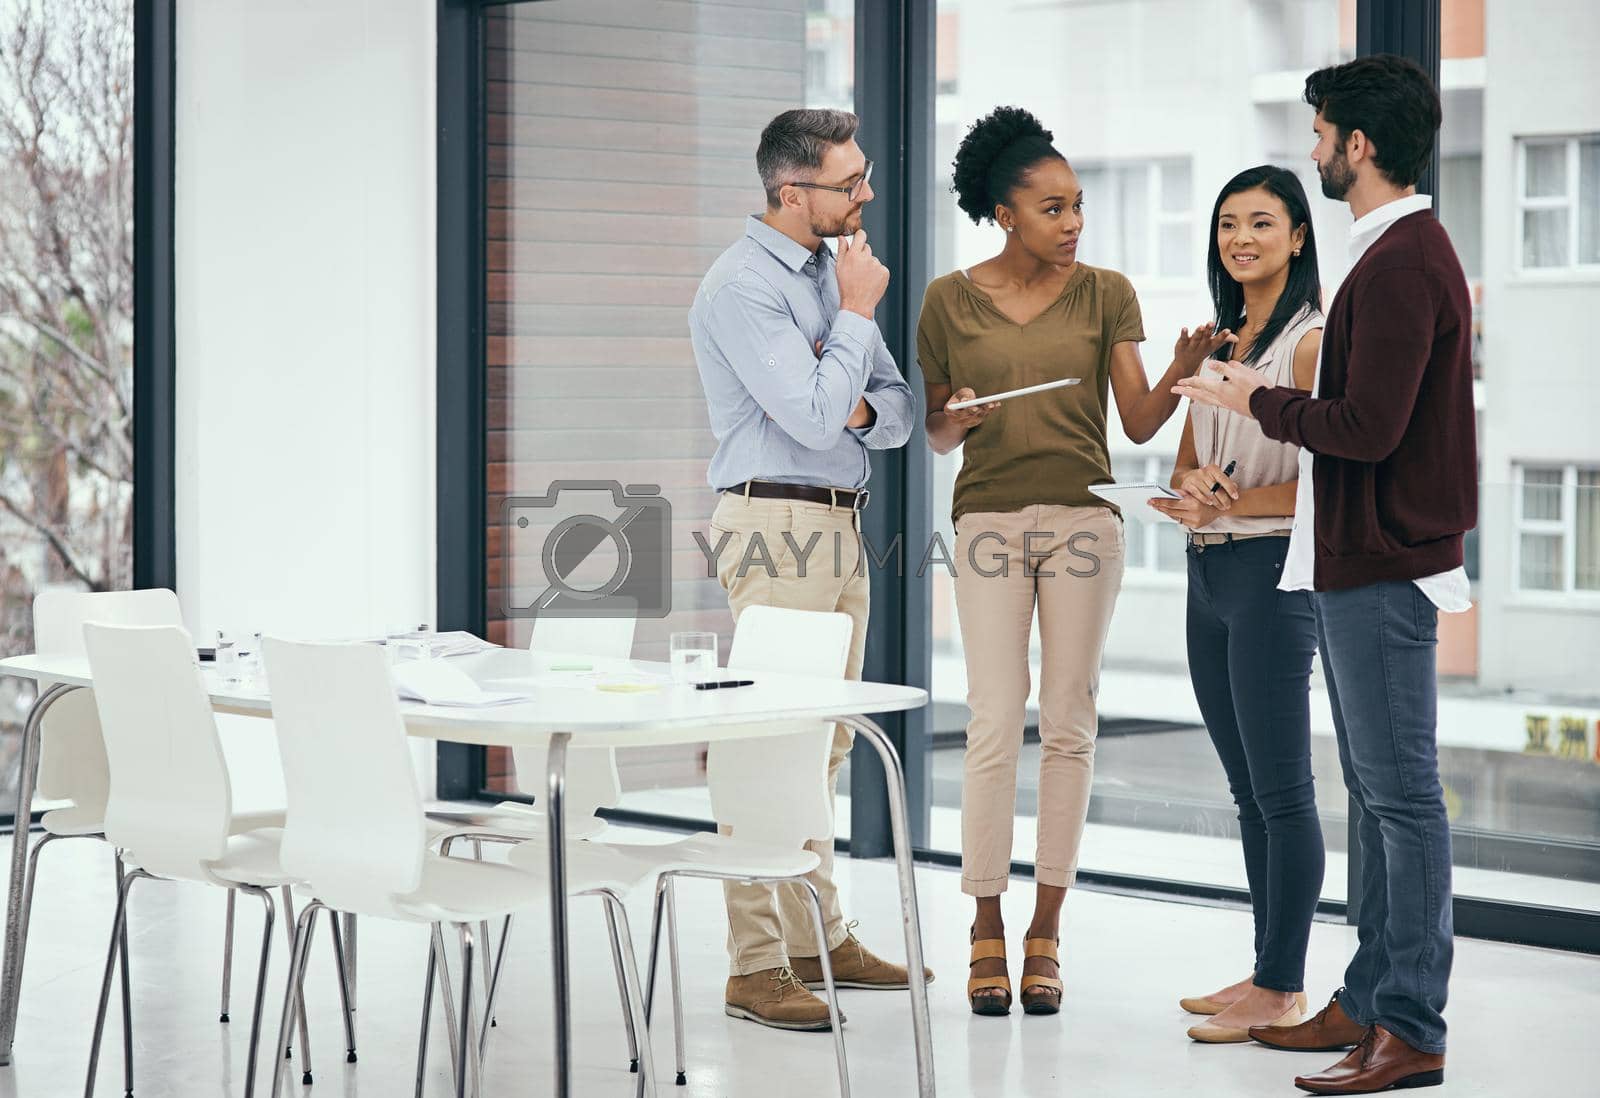 Royalty free image of Letting ambition drive them towards success. a group of colleagues having a discussion in an office. by YuriArcurs